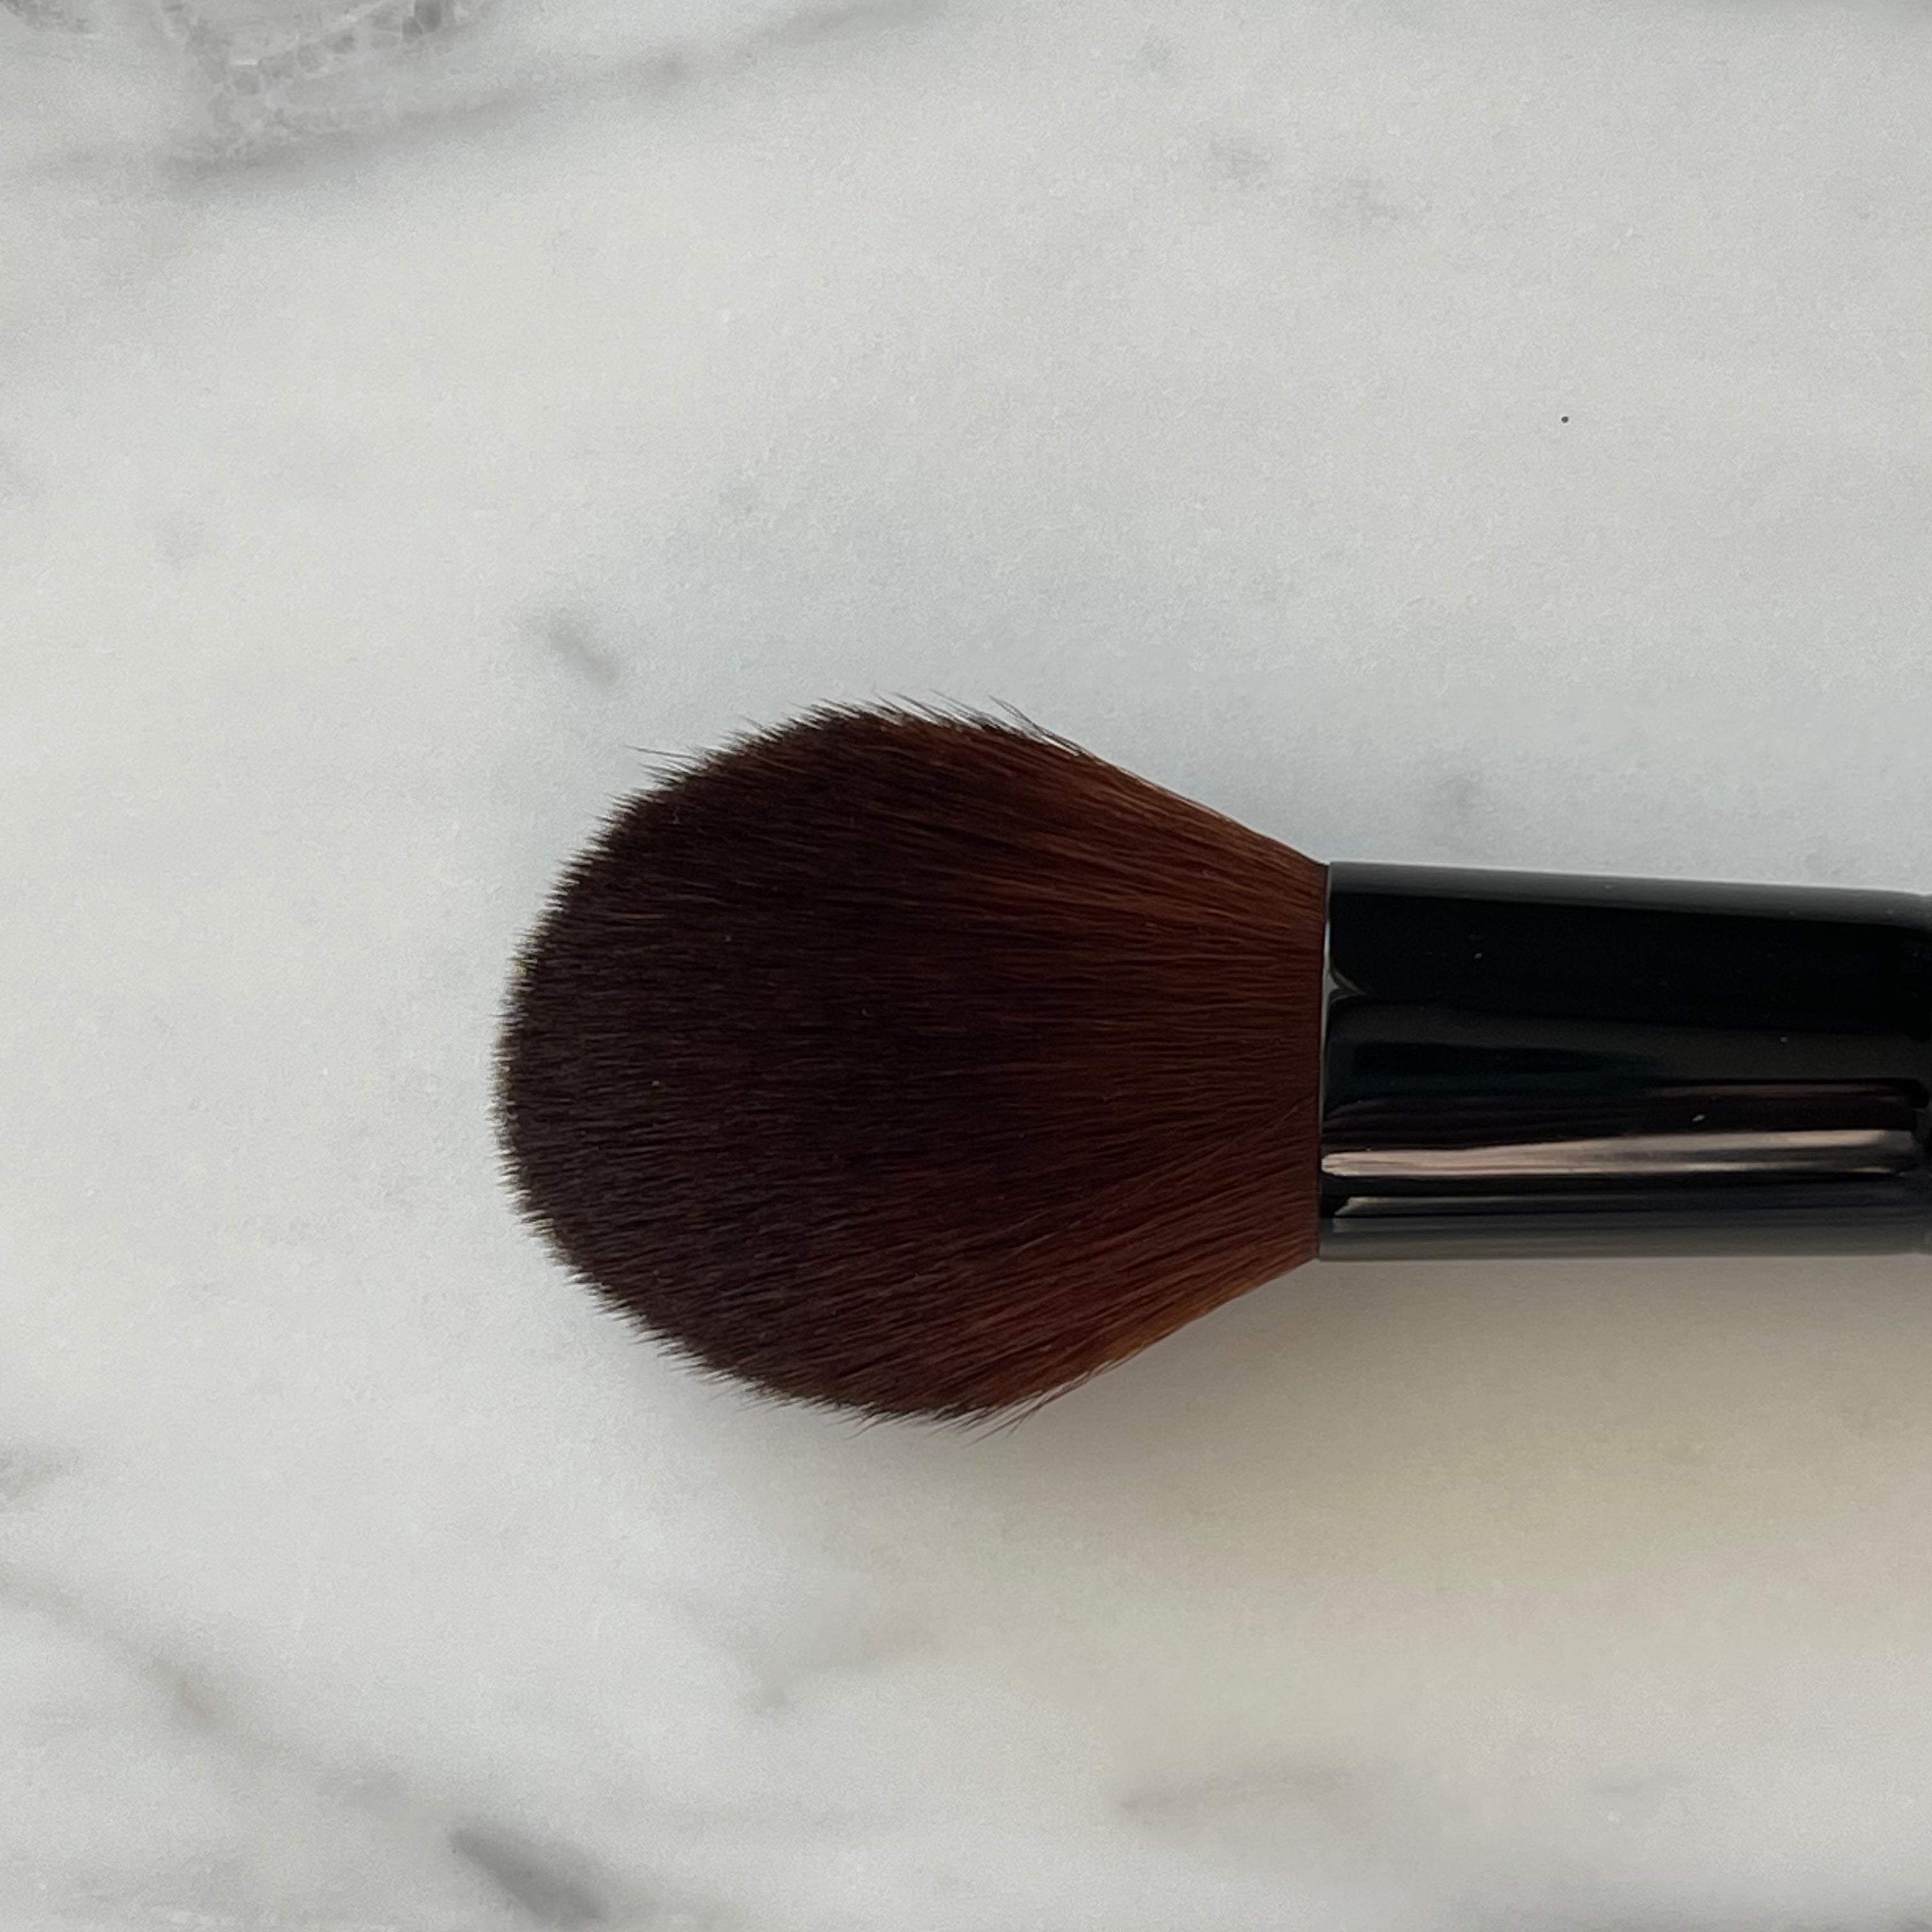 Lux Large Pointed Face Brush